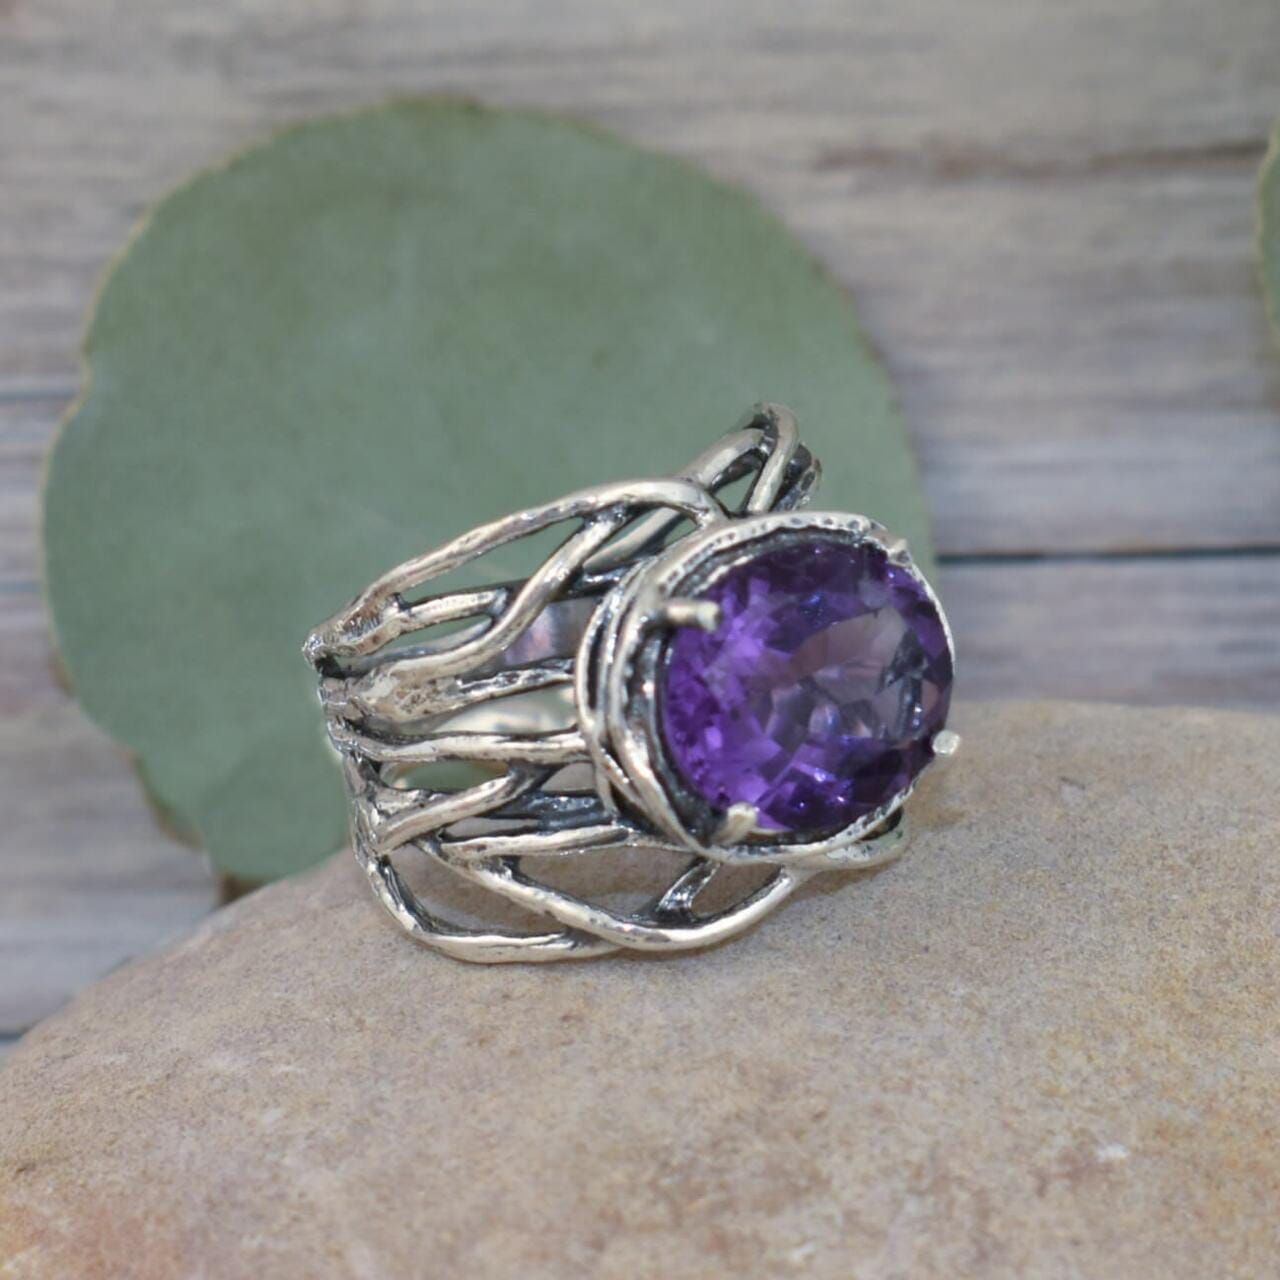 .925 sterling silver with natural amethyst stone